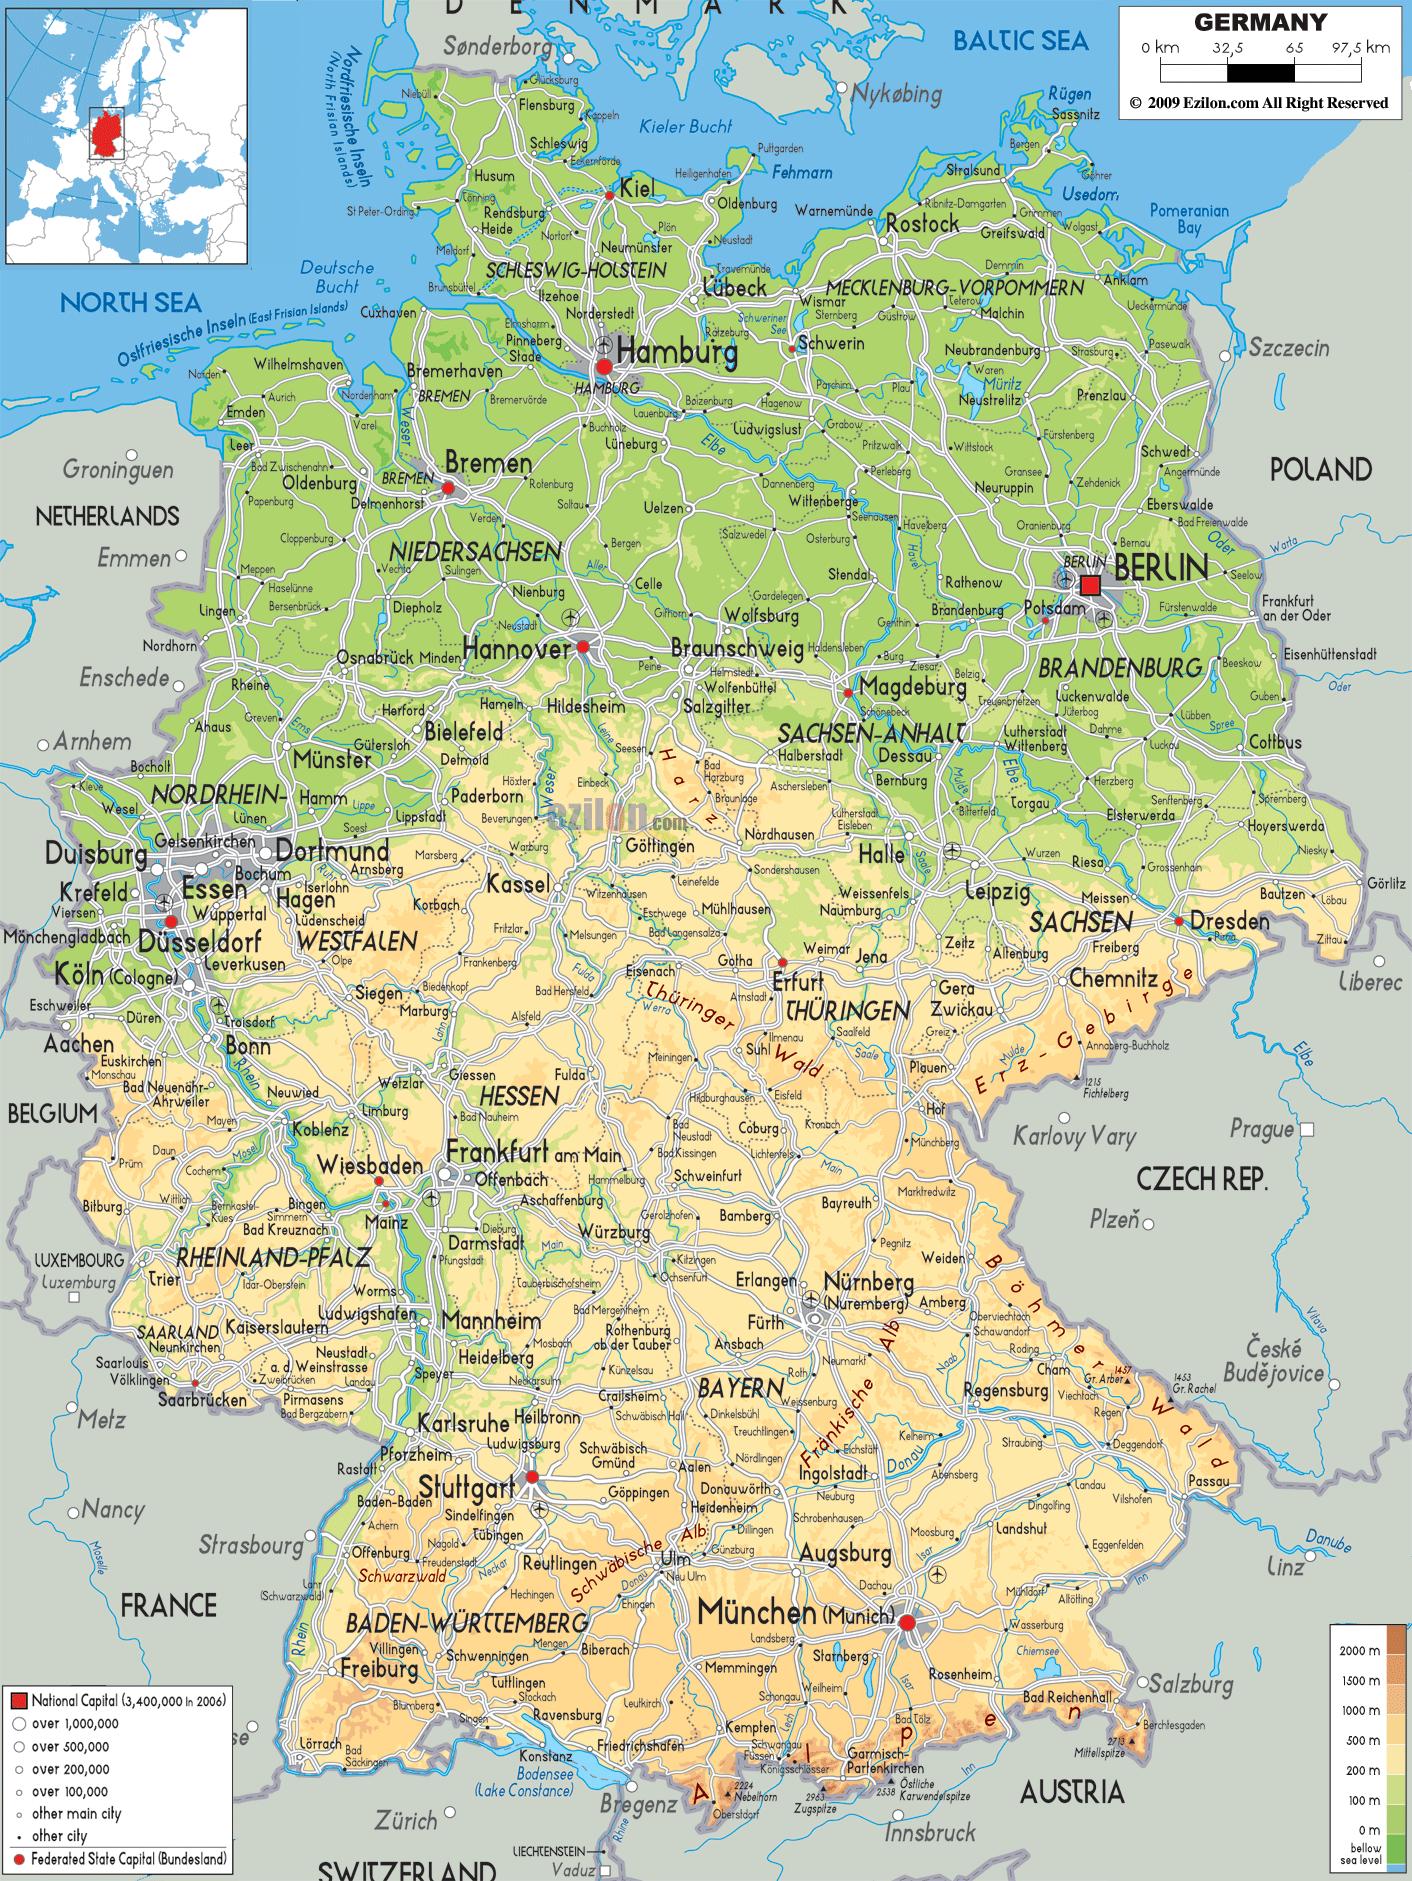 Michelin maps Germany - Germany highway map (Western Europe - Europe)